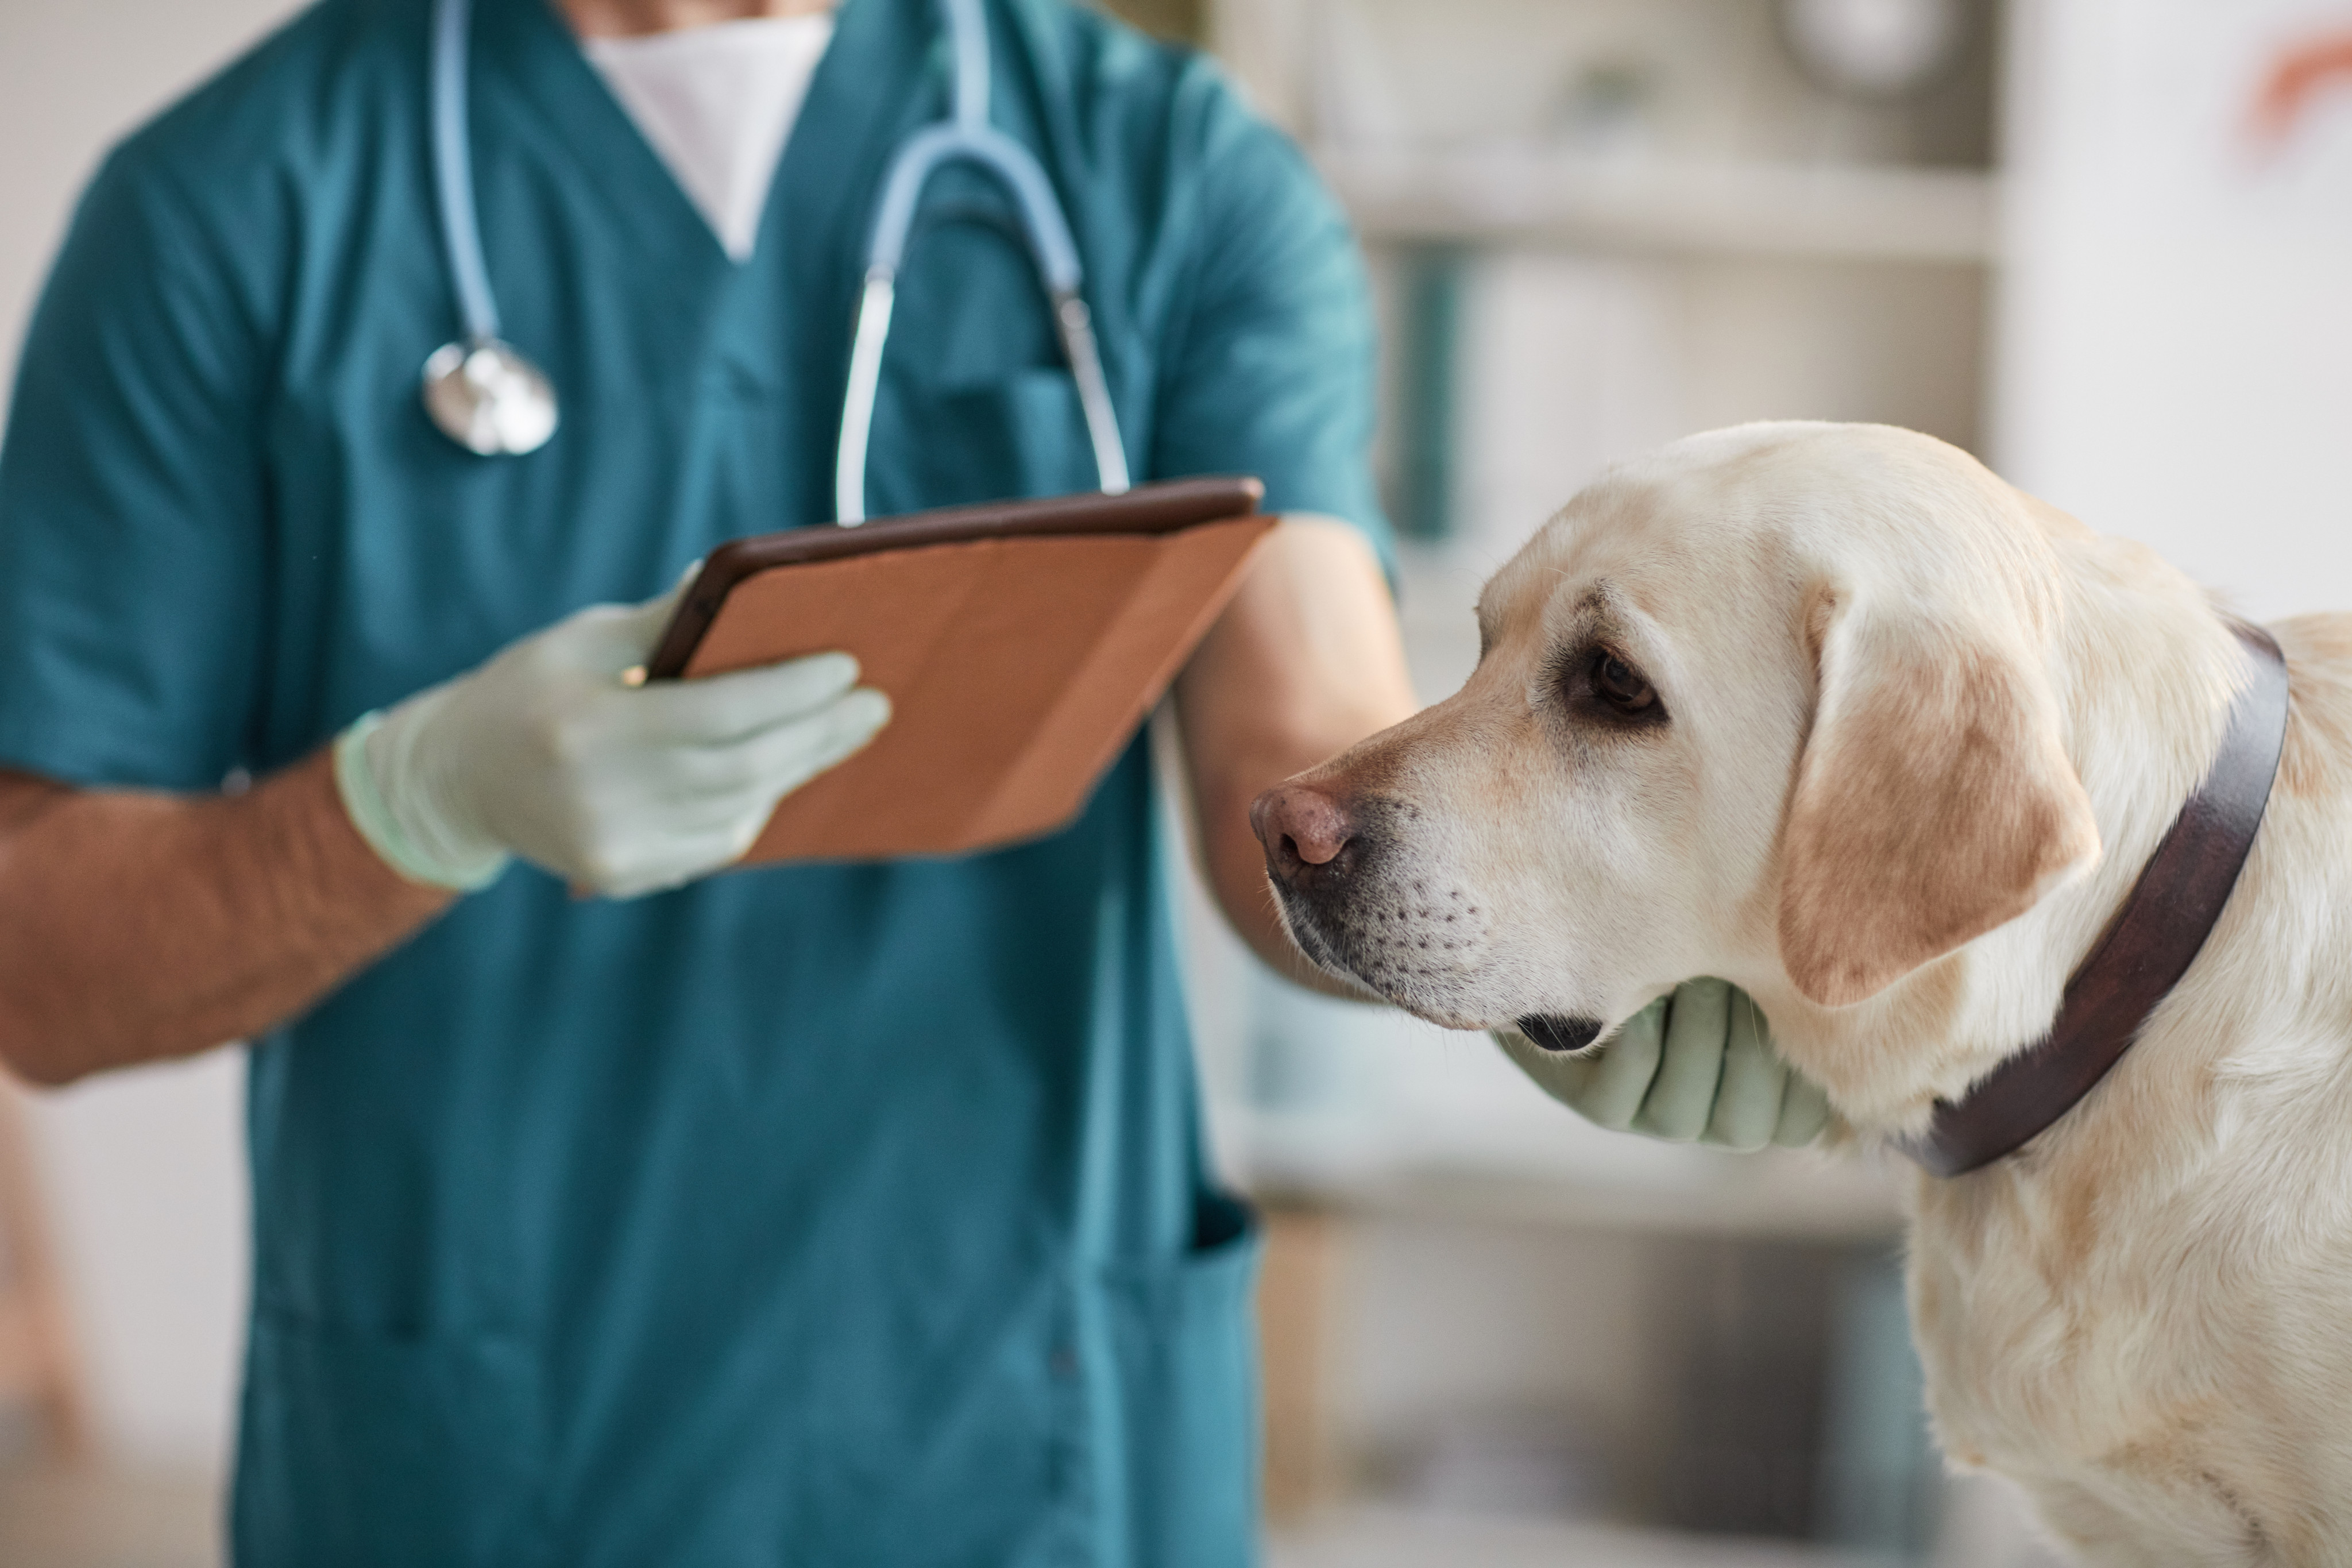 A Singapore-born veterinary surgeon working in Australia has been fined for a series of inappropriate acts involving animals. Photo: Shutterstock